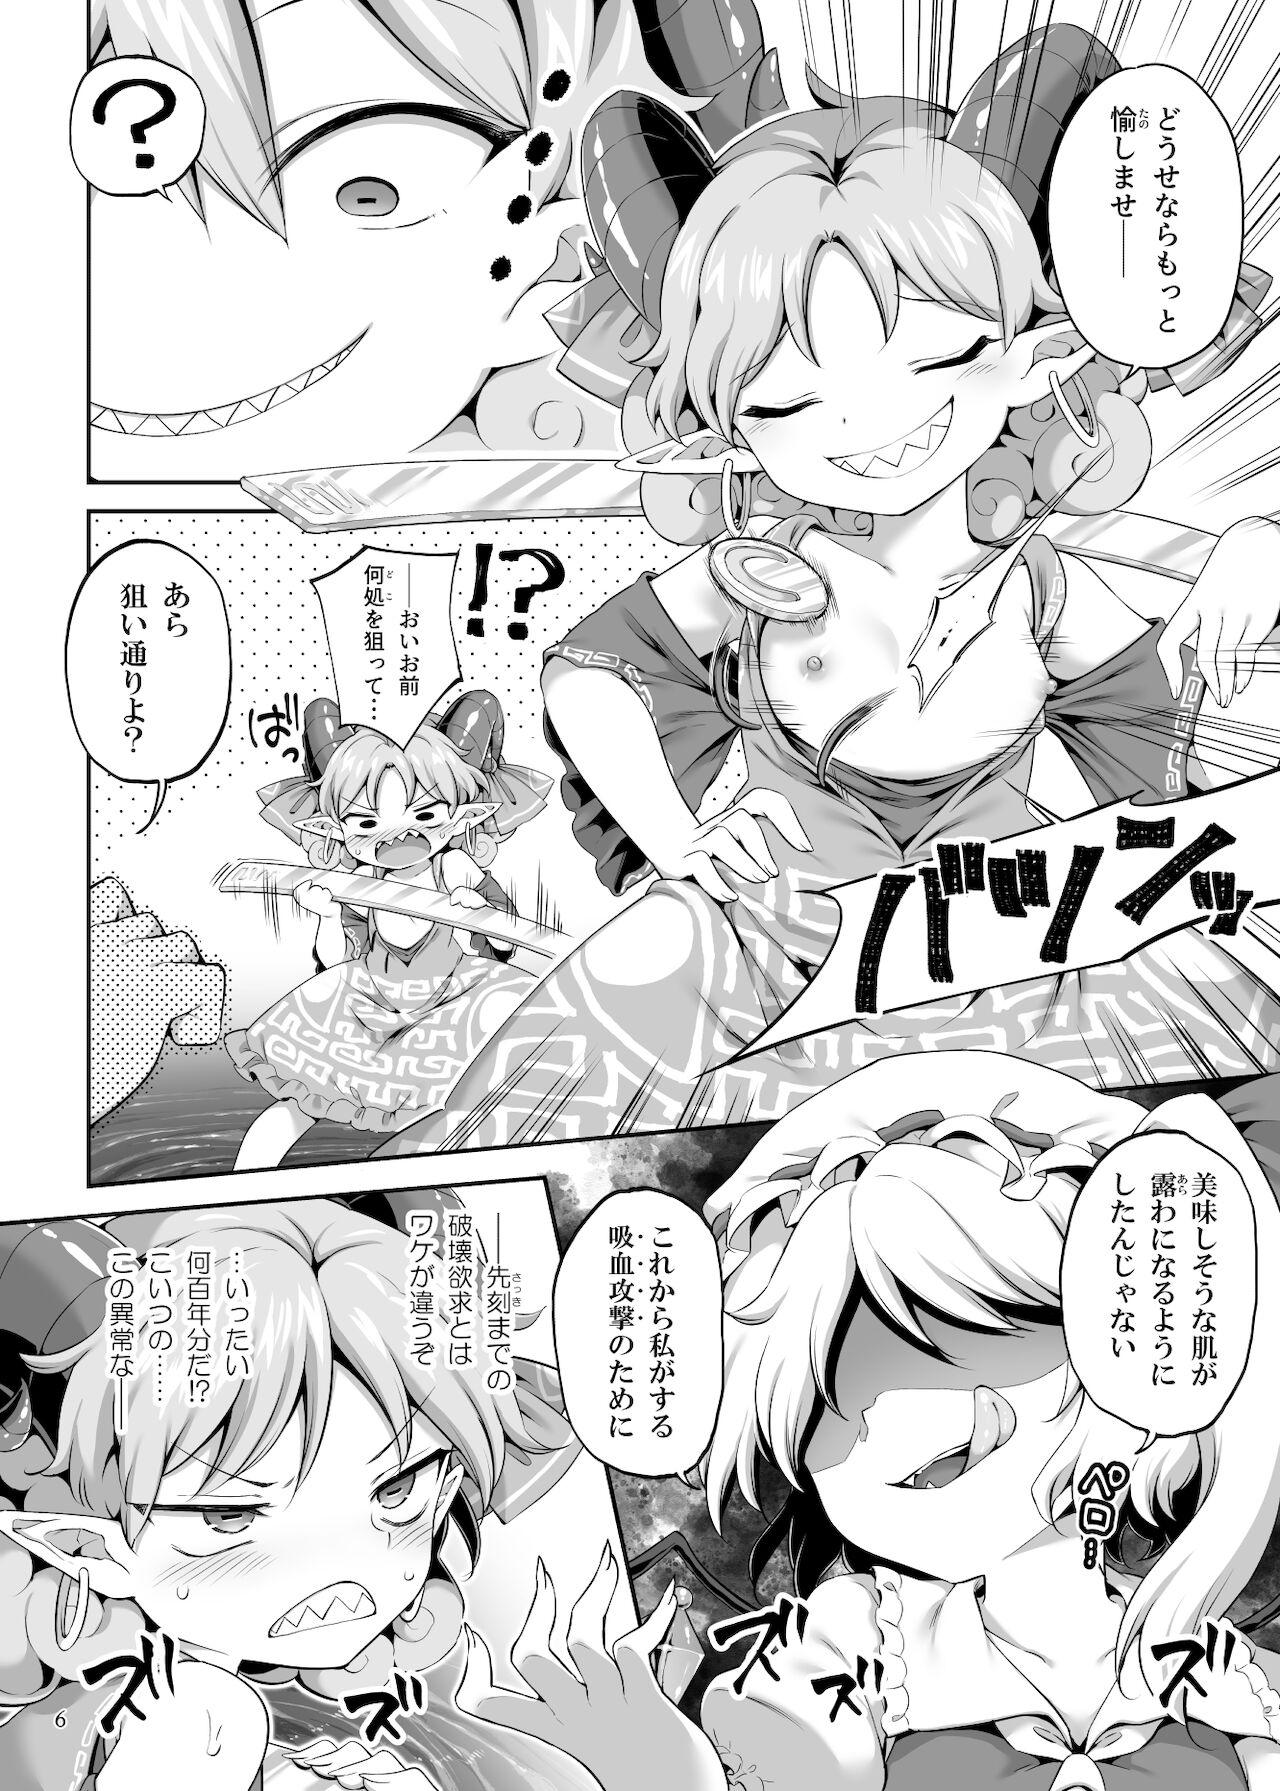 Peeing 吸われて駄目なら吸ってみろ! - Touhou project Exgf - Page 6